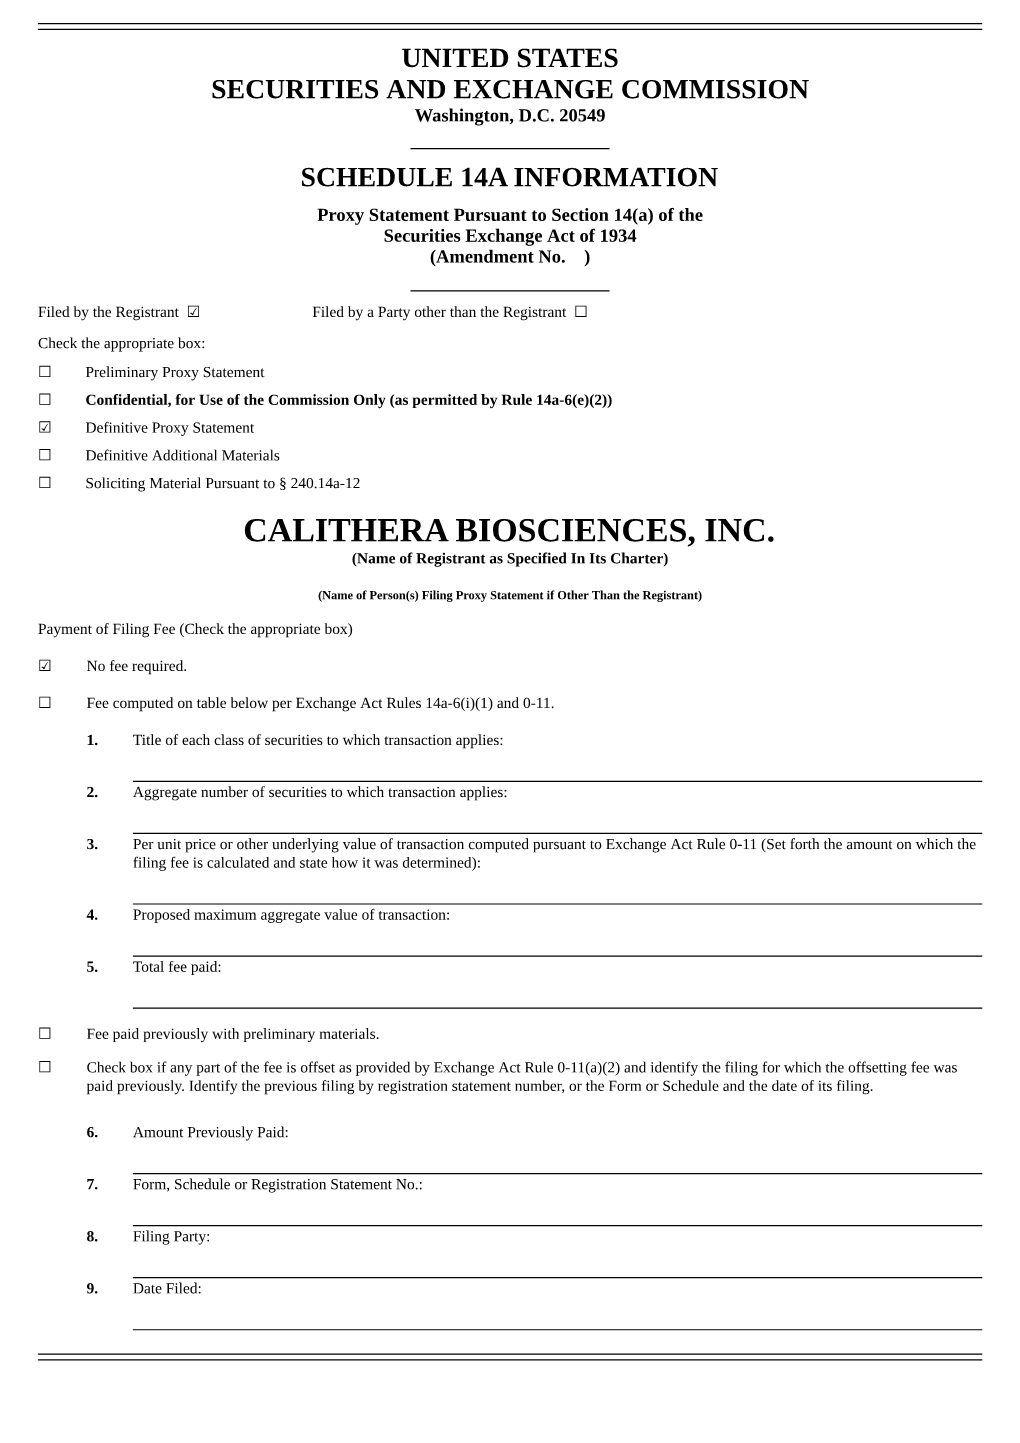 CALITHERA BIOSCIENCES, INC. (Name of Registrant As Specified in Its Charter)